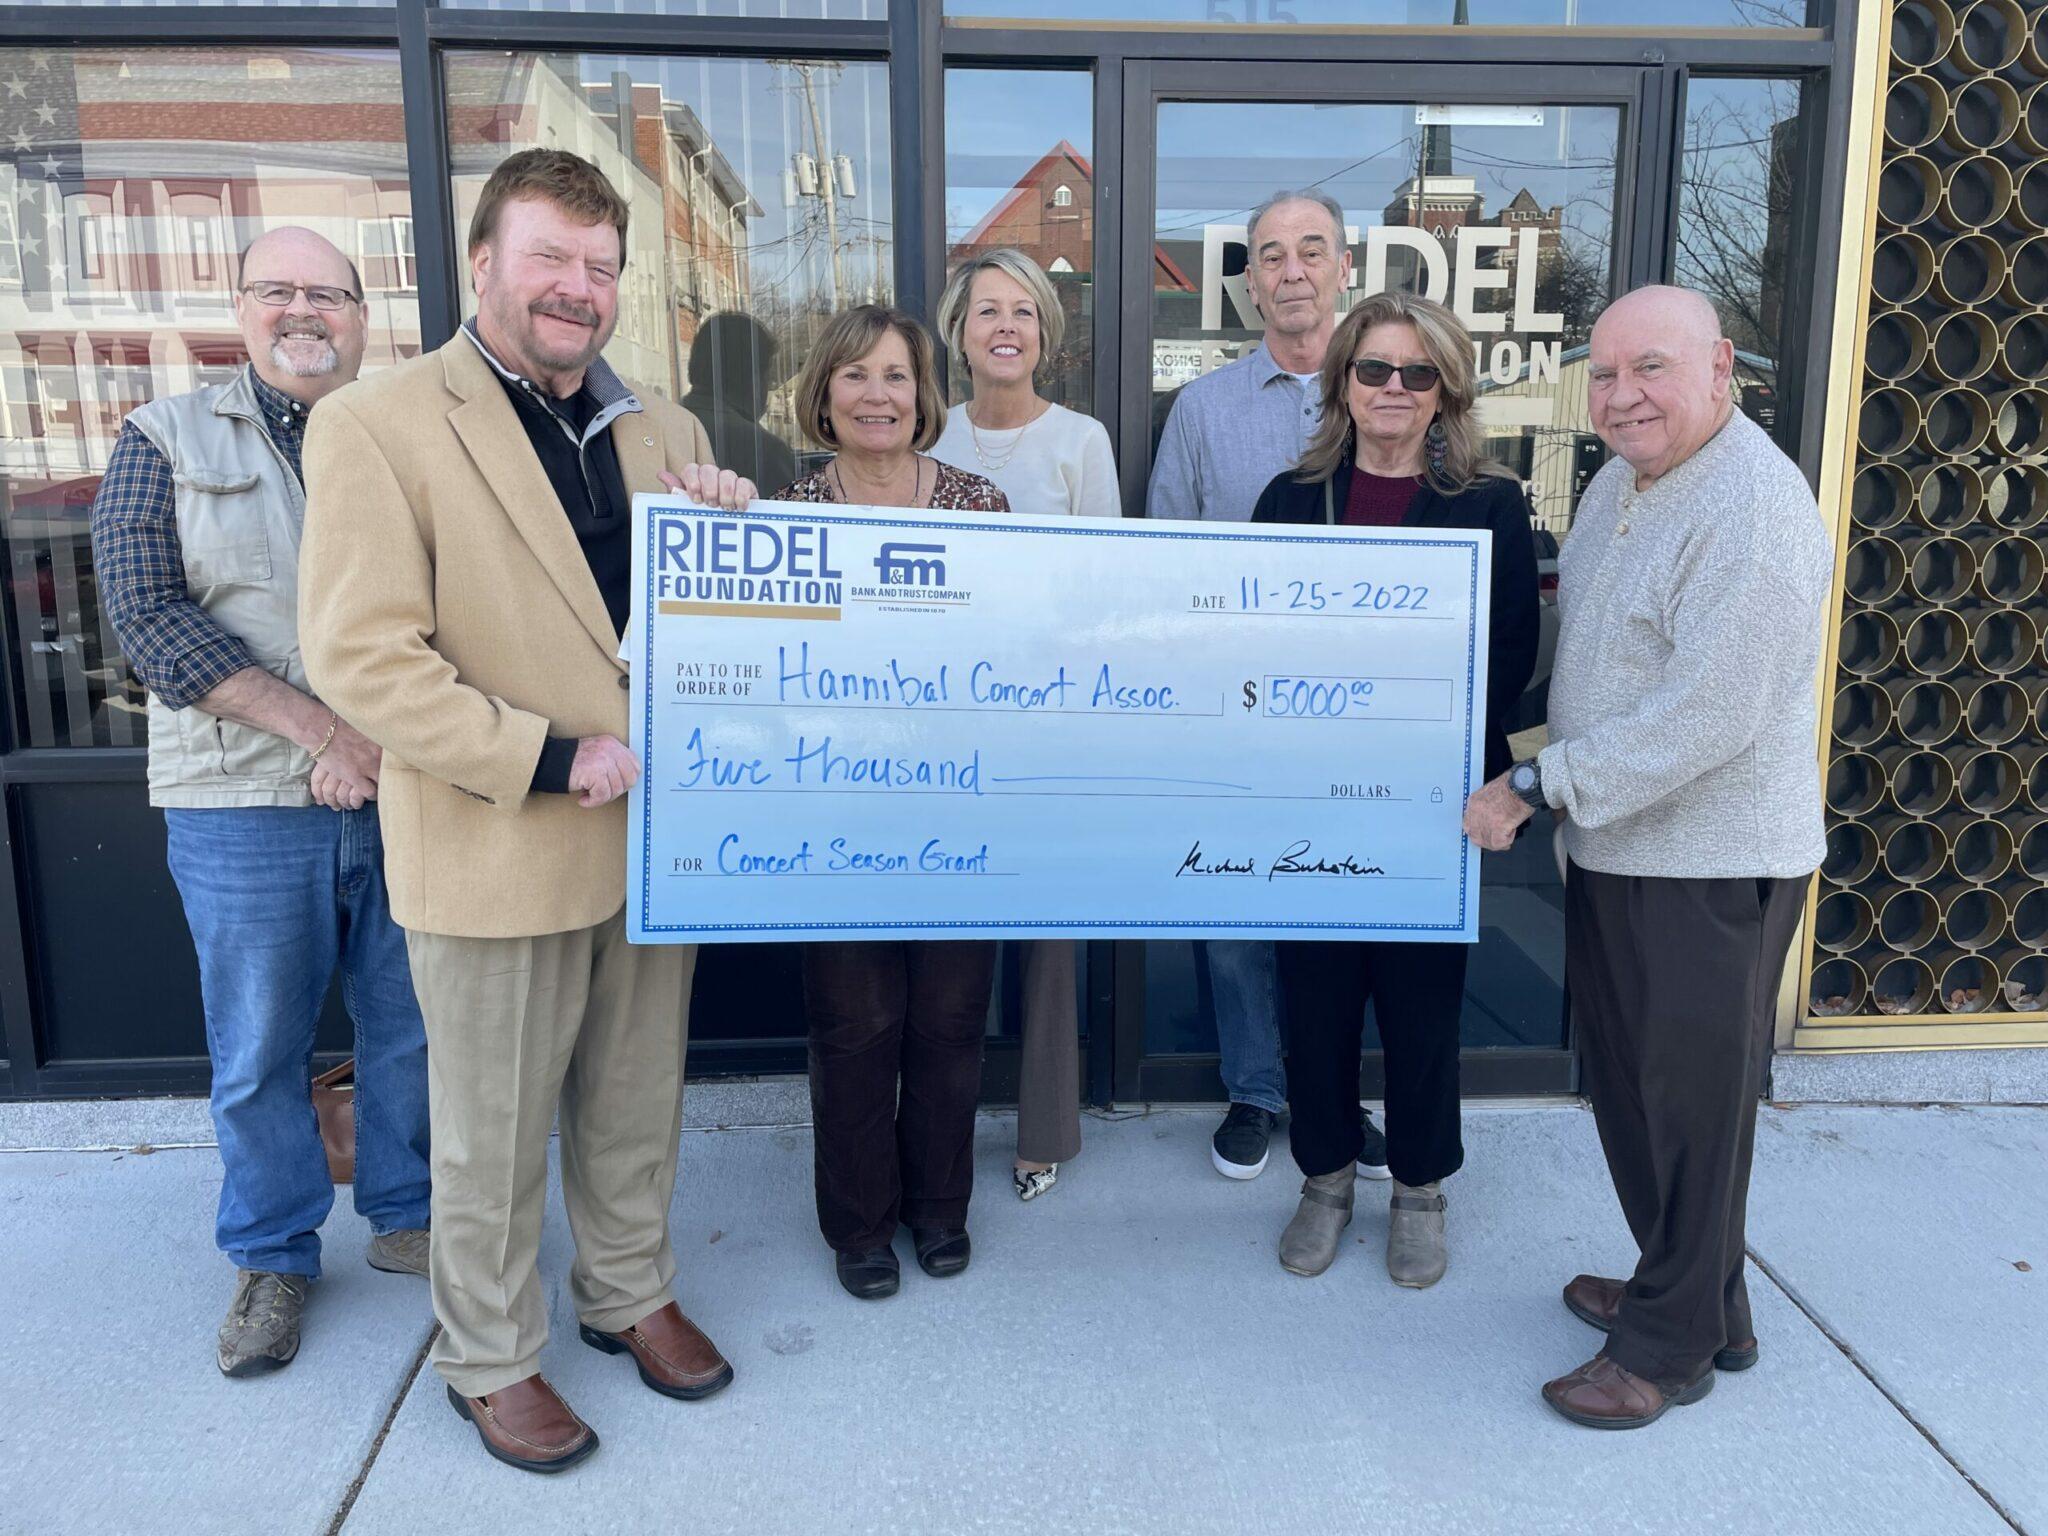 Riedel Foundation Trustee April Baldwin presents a $5,000 check to members of the Hannibal Concert Association. Pictured left to right: Mark Eggleston, Bill Esicar, Joni Halpin, April Baldwin, Clark Todd, Sue Giroux, and Dave Dexheimer.